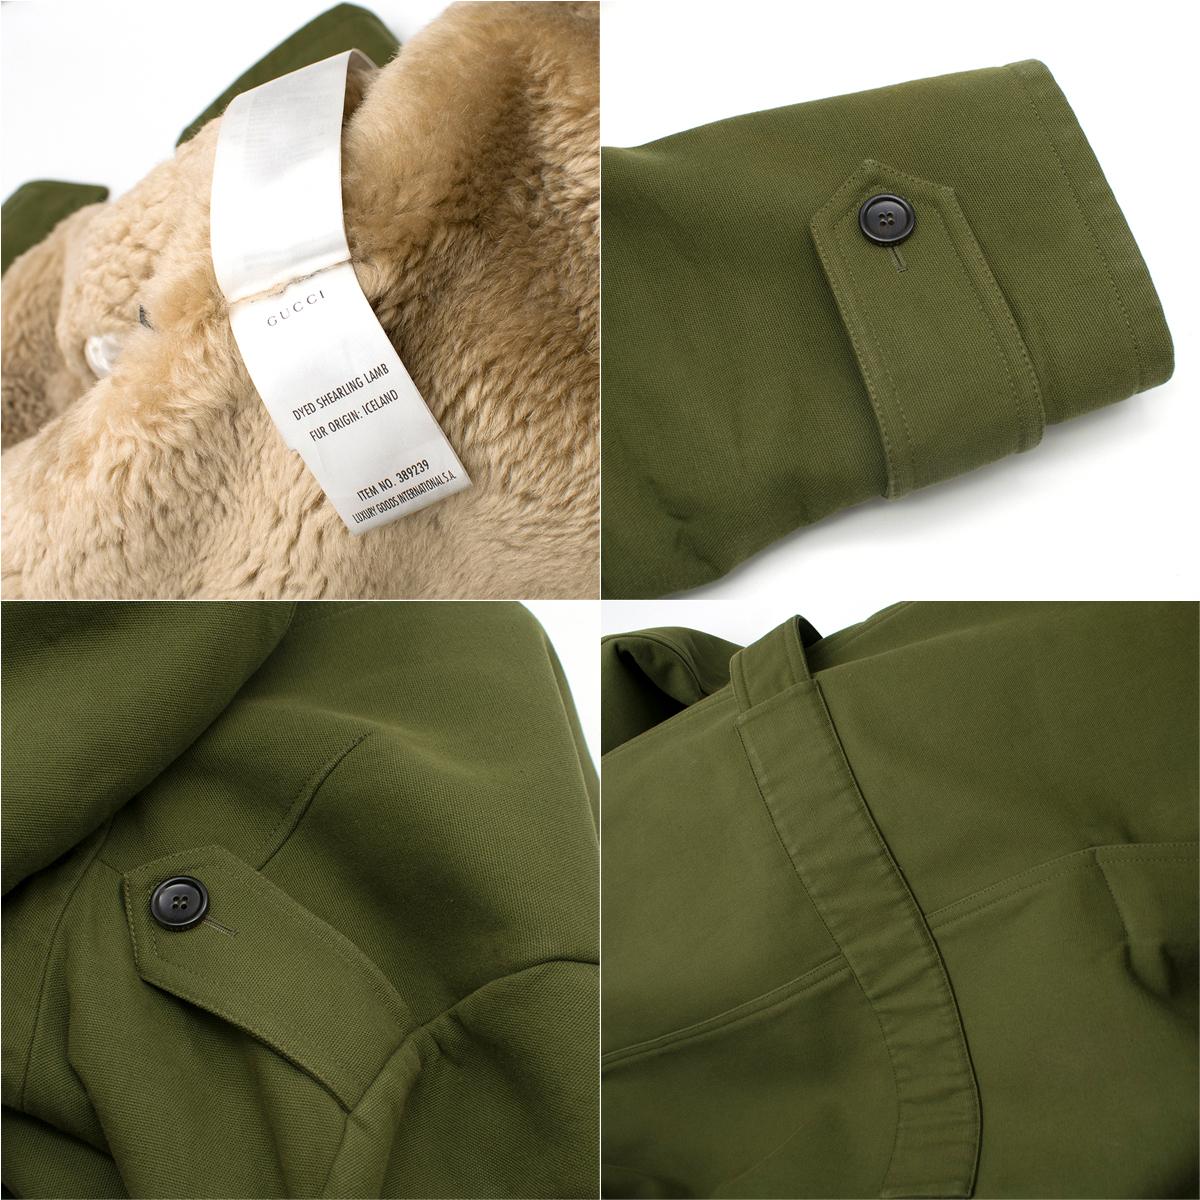 Gucci Men's Shearling-Lined Green Canvas Parka IT 48 2